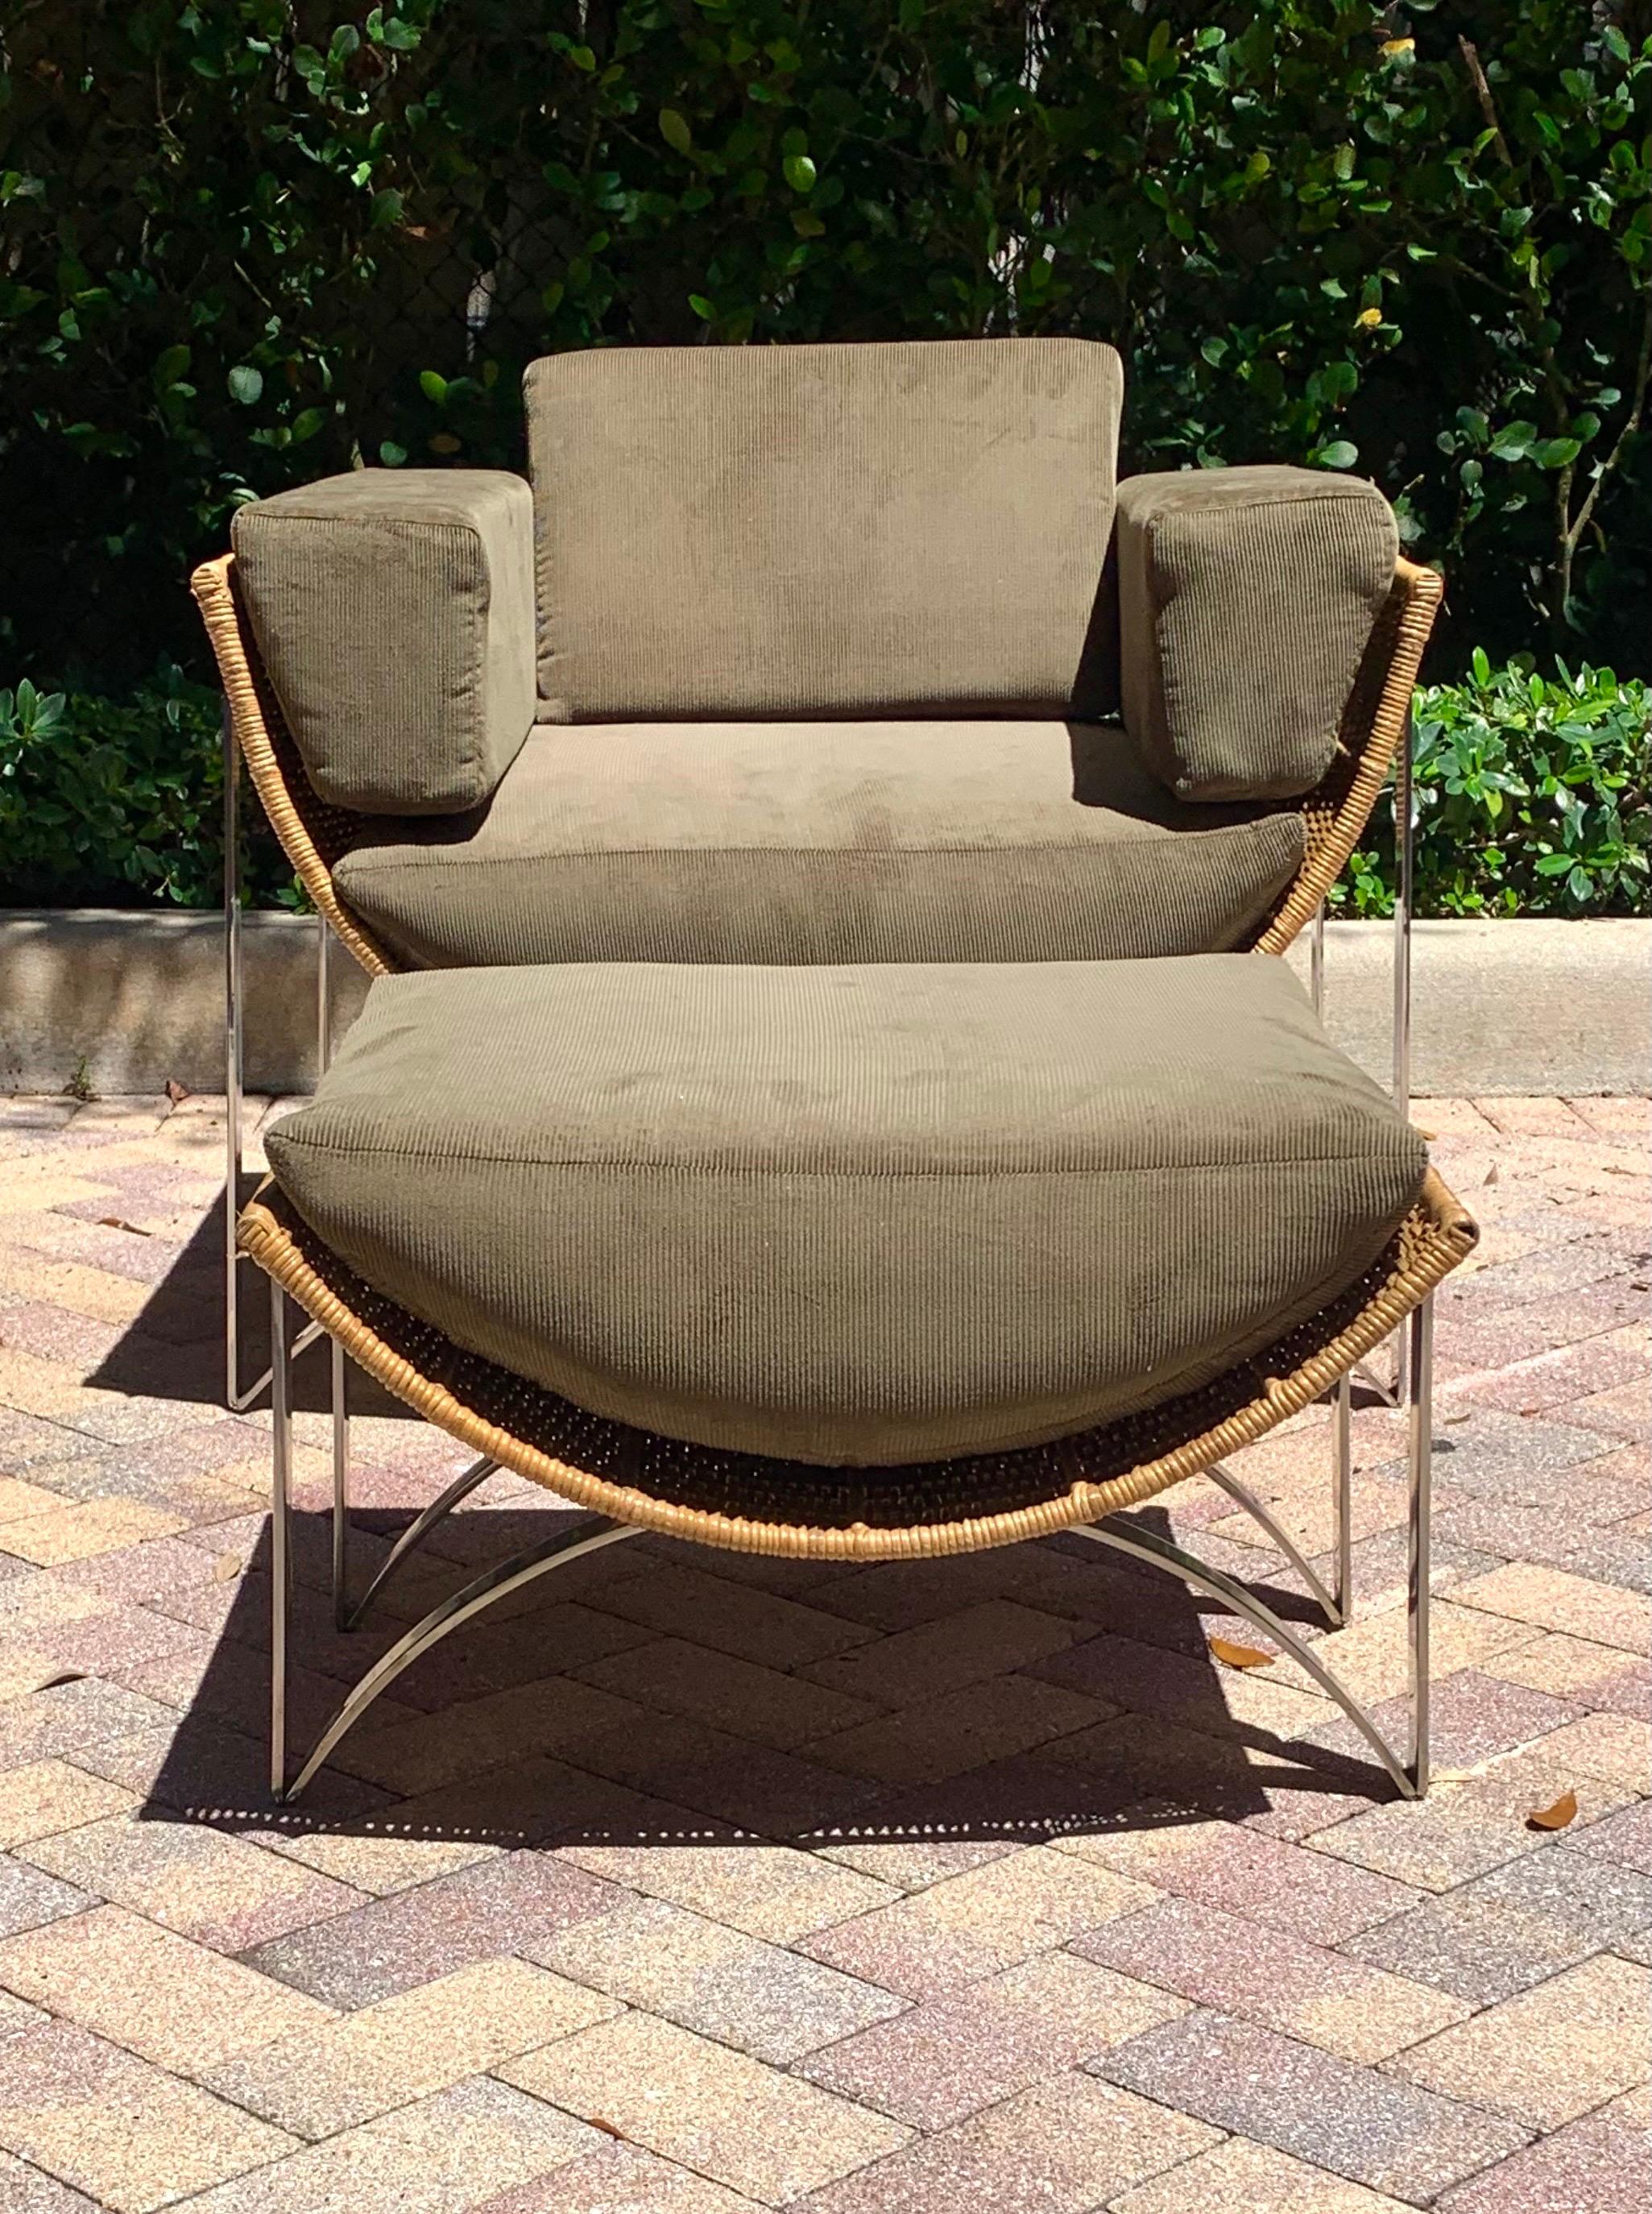 Mid-Century Modern Cane and Chrome Lounge Chair and Ottoman In Good Condition For Sale In Boynton Beach, FL